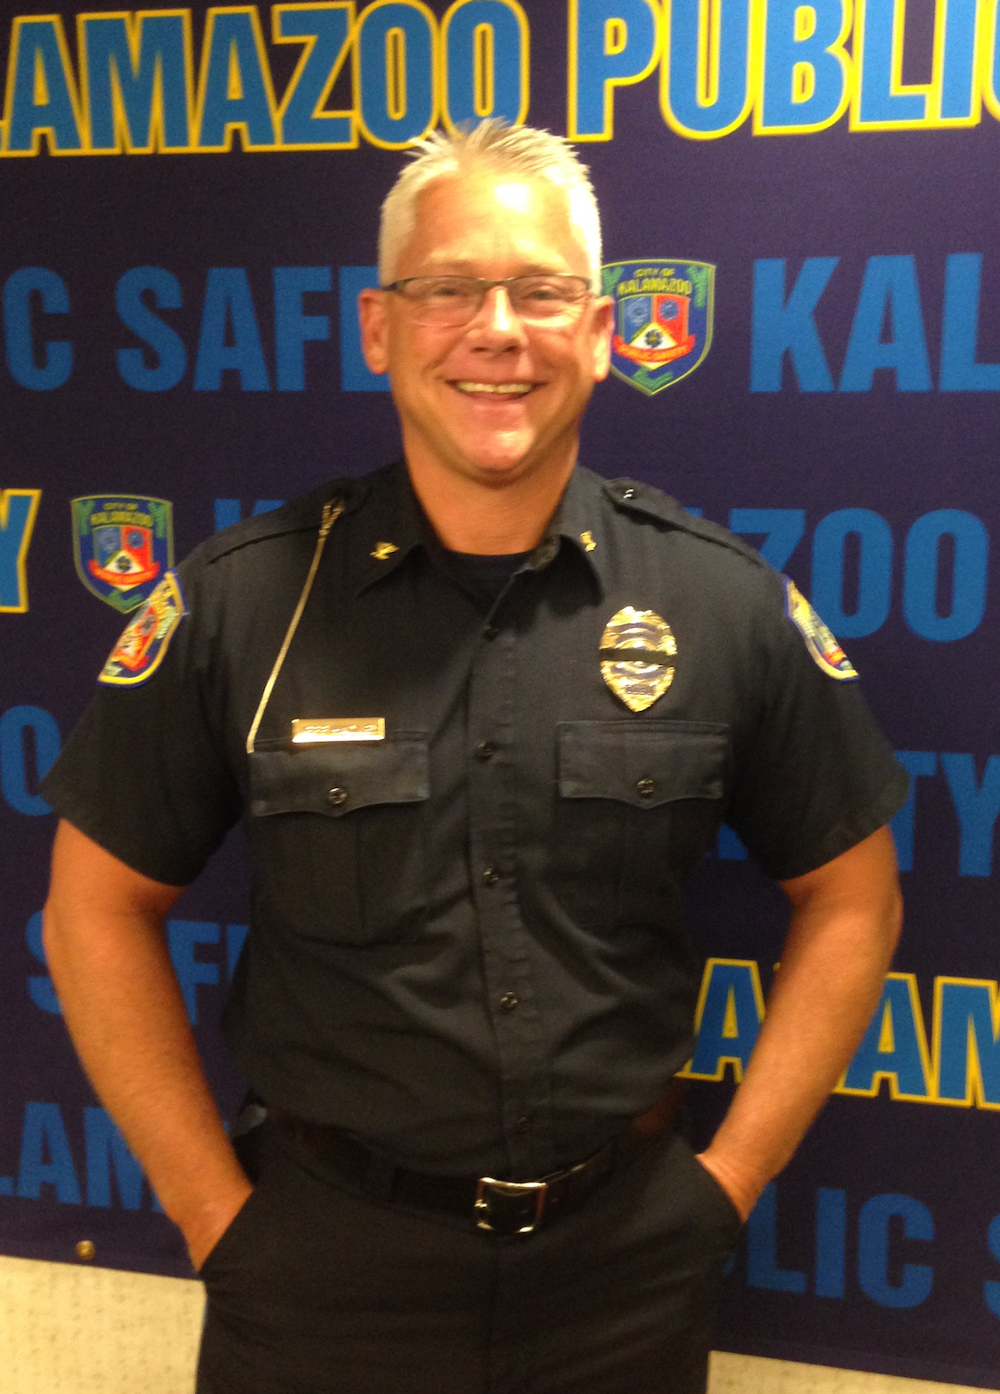 Kalamazoo Police Chief Jeff Hadley is hopeful that a new program will reduce violence and build community relations. (Bridge photo by Ron French) 